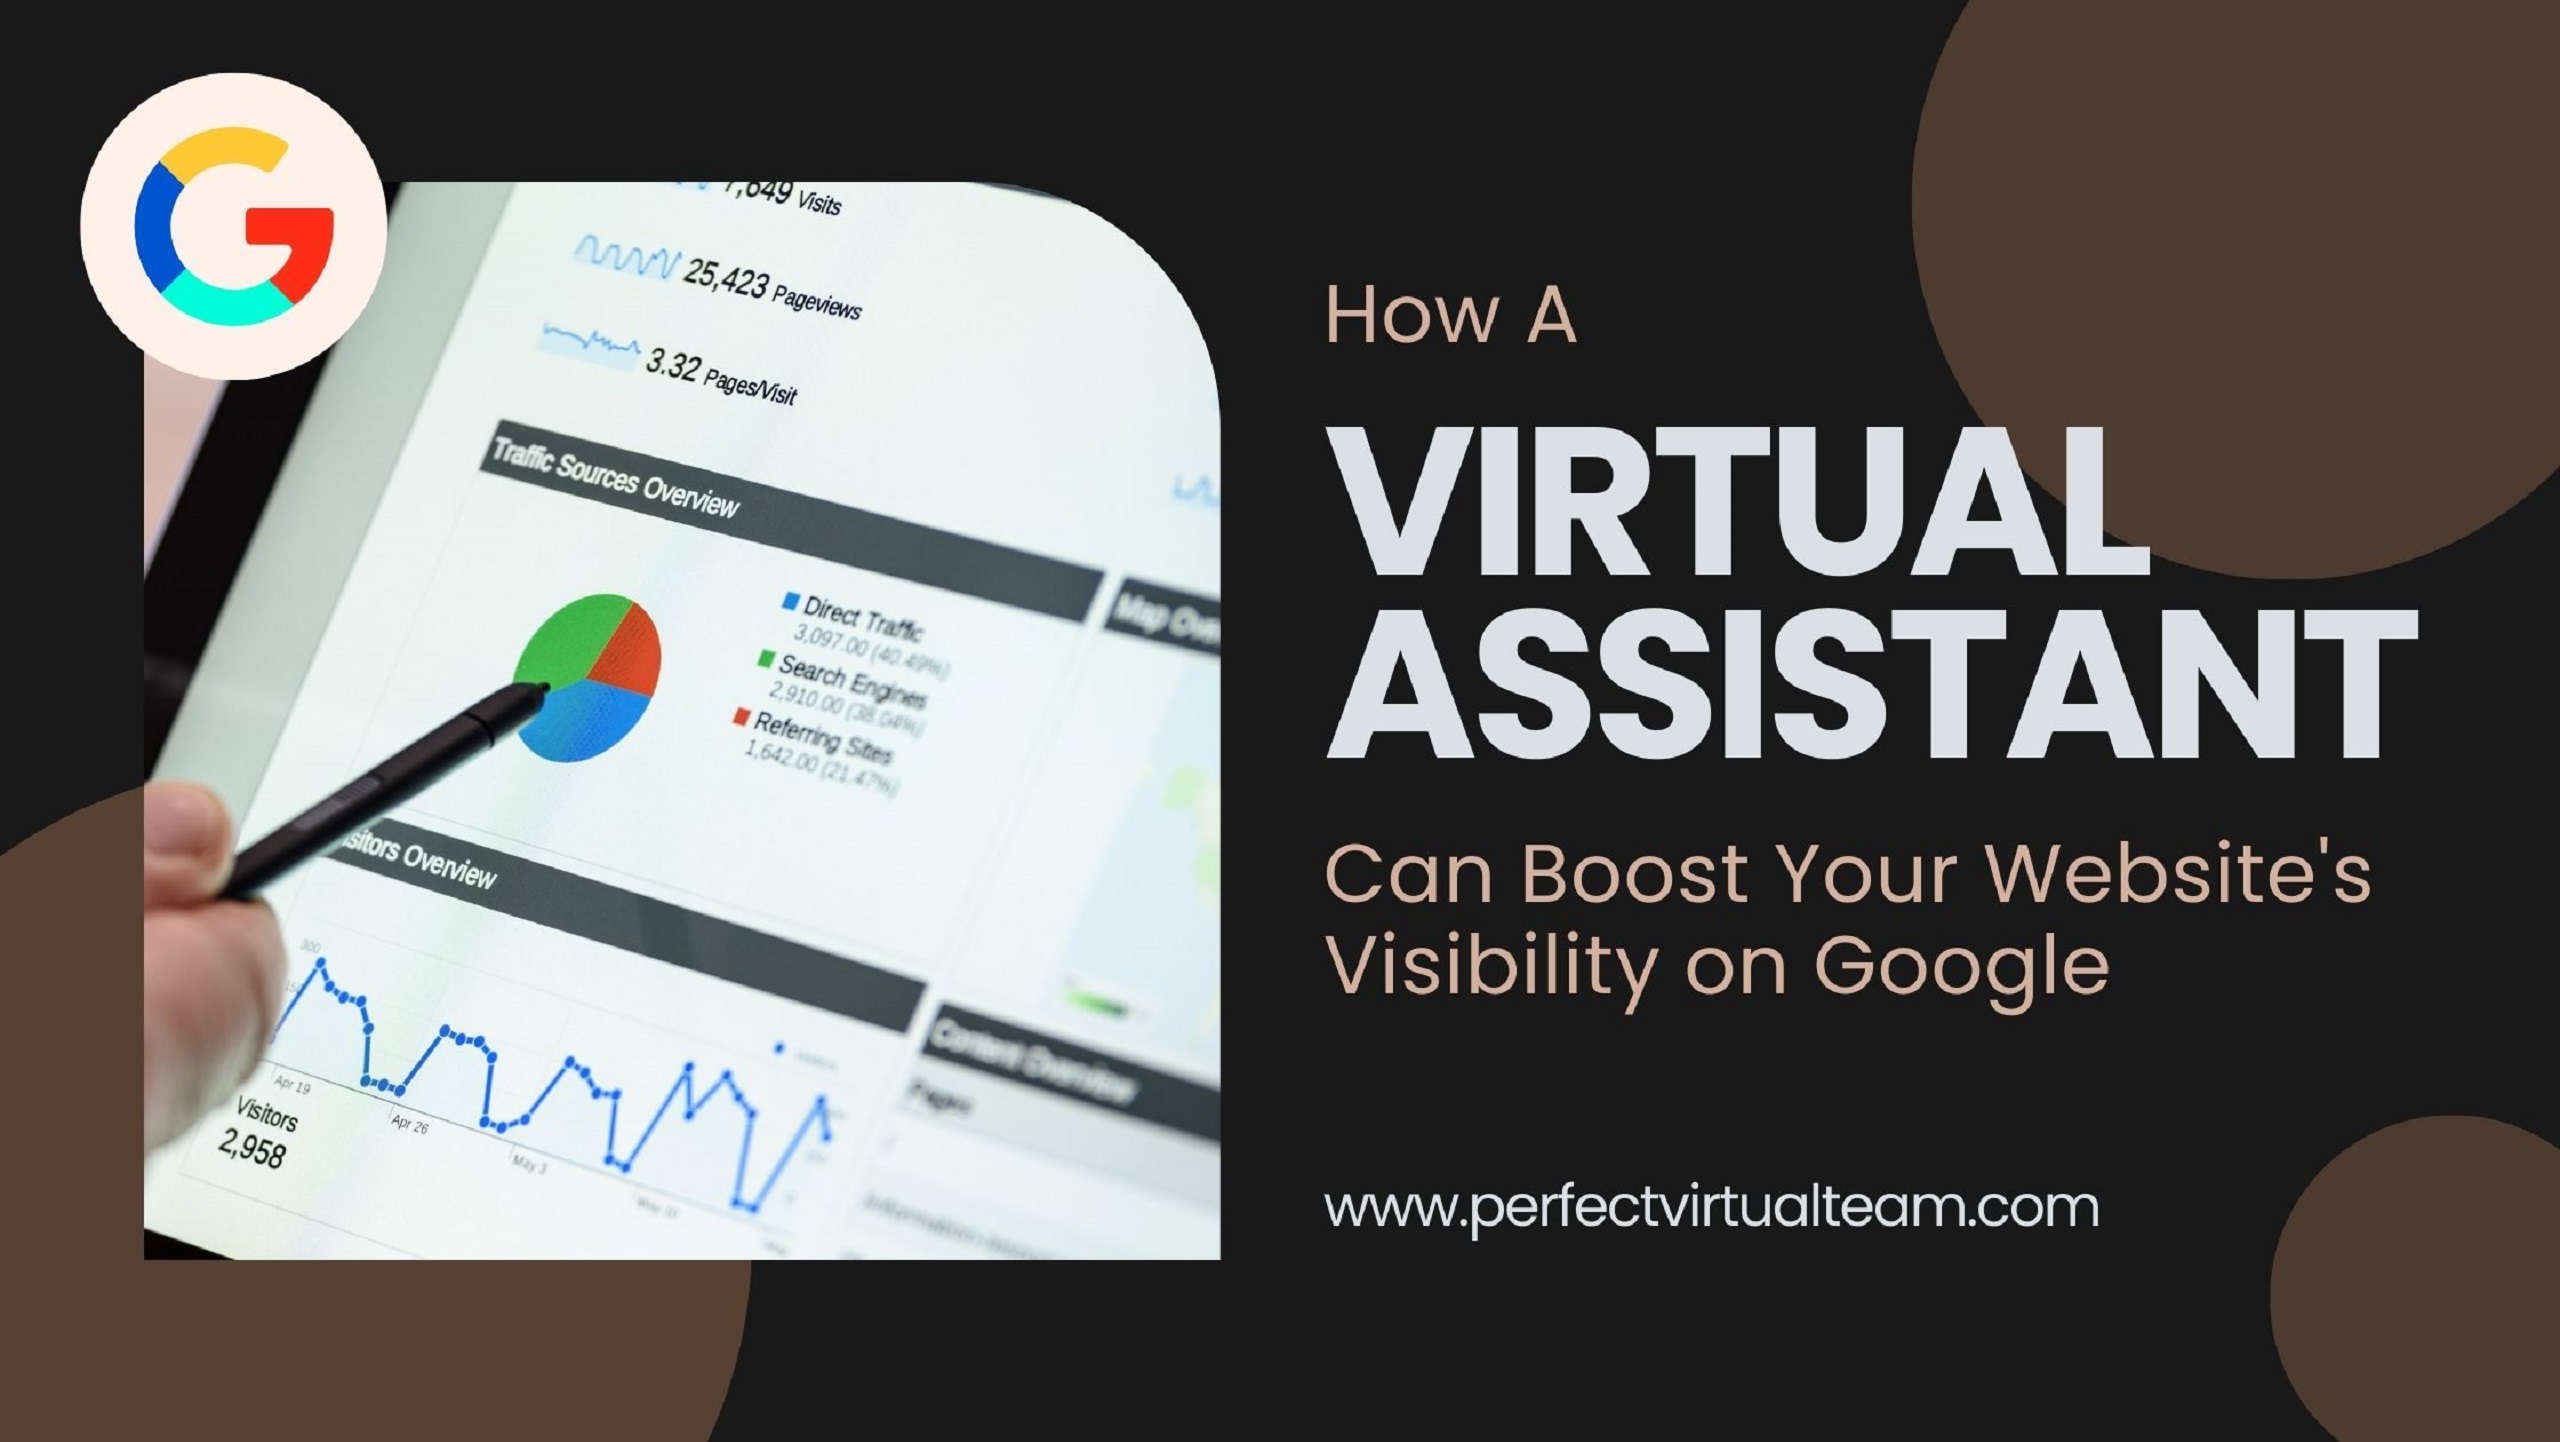 How a Virtual Assistant Can Boost Your Website's Visibility on Google